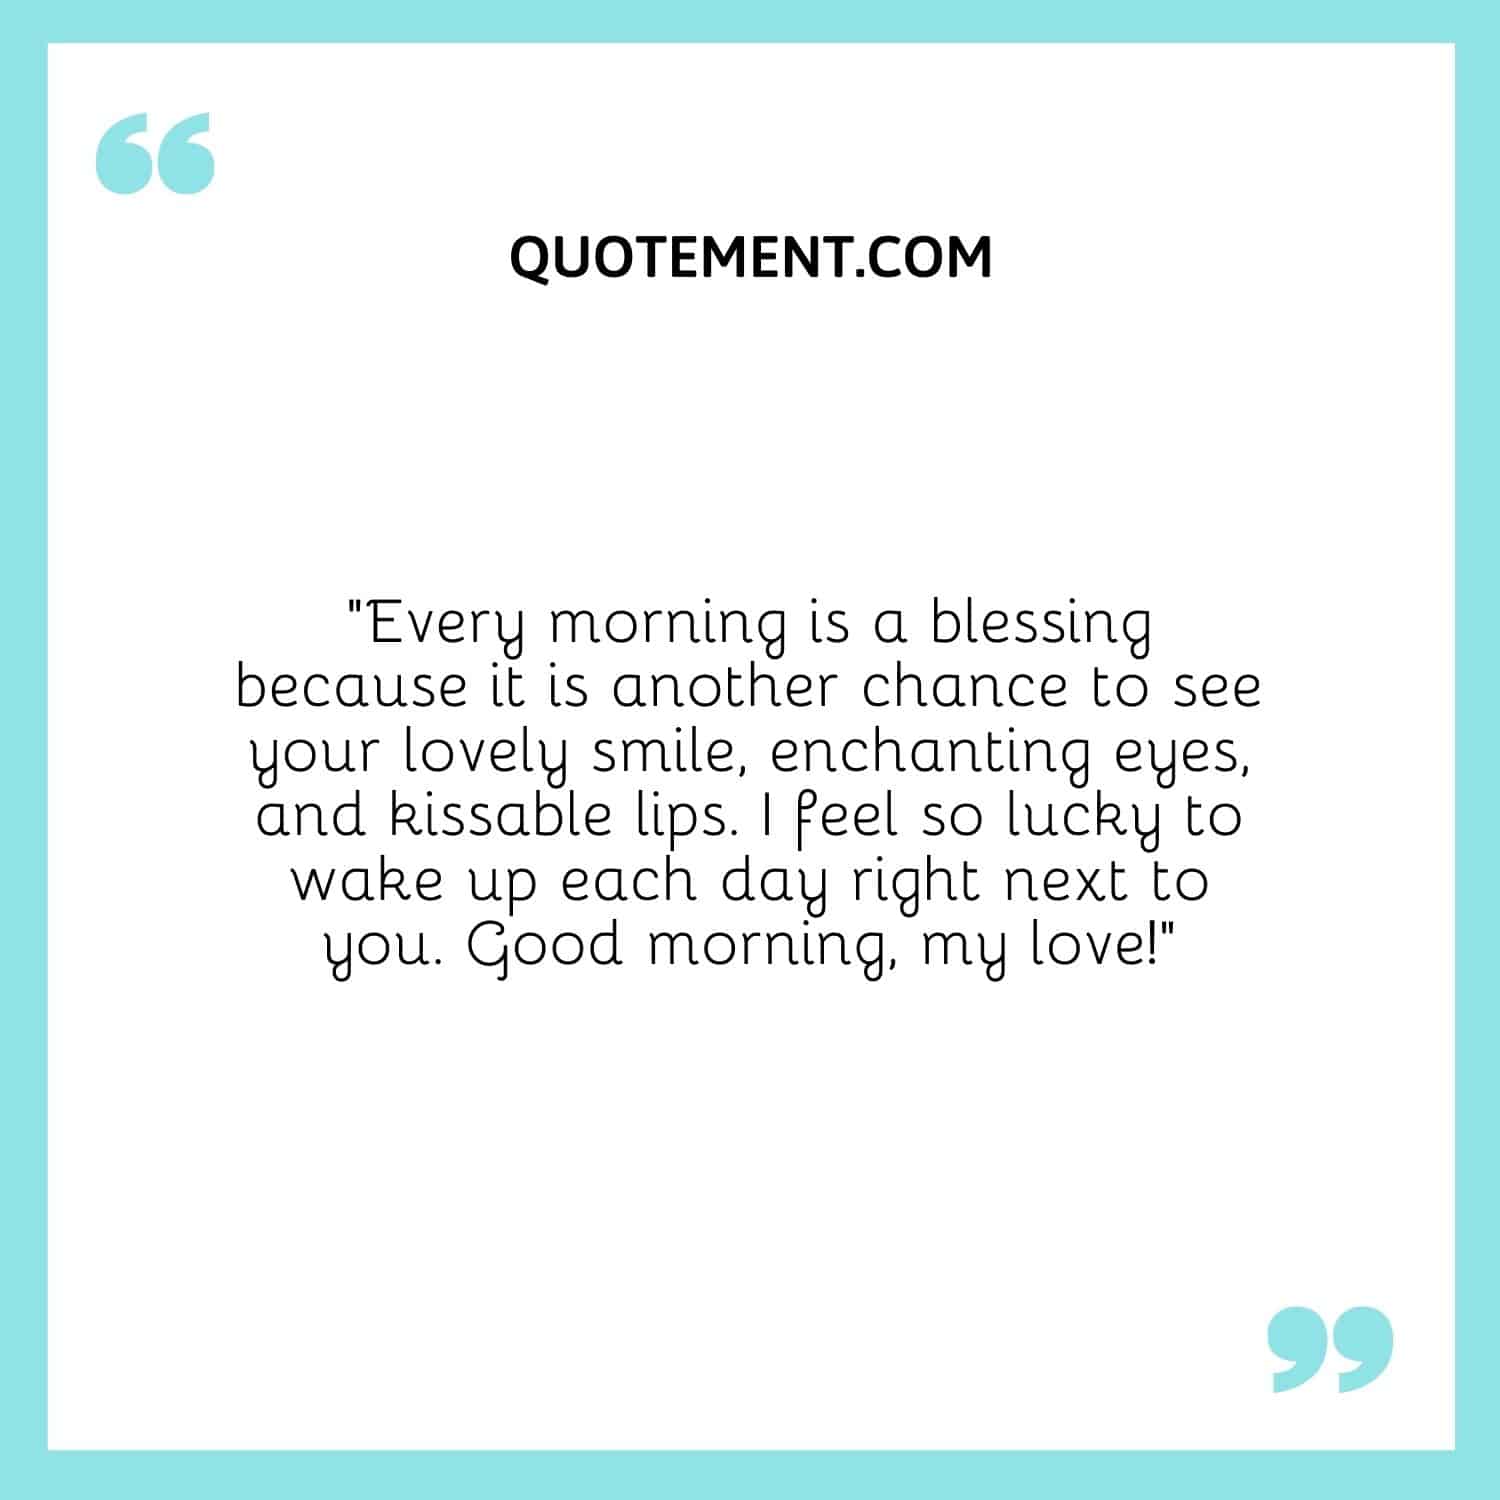 Every morning is a blessing because it is another chance to see your lovely smile